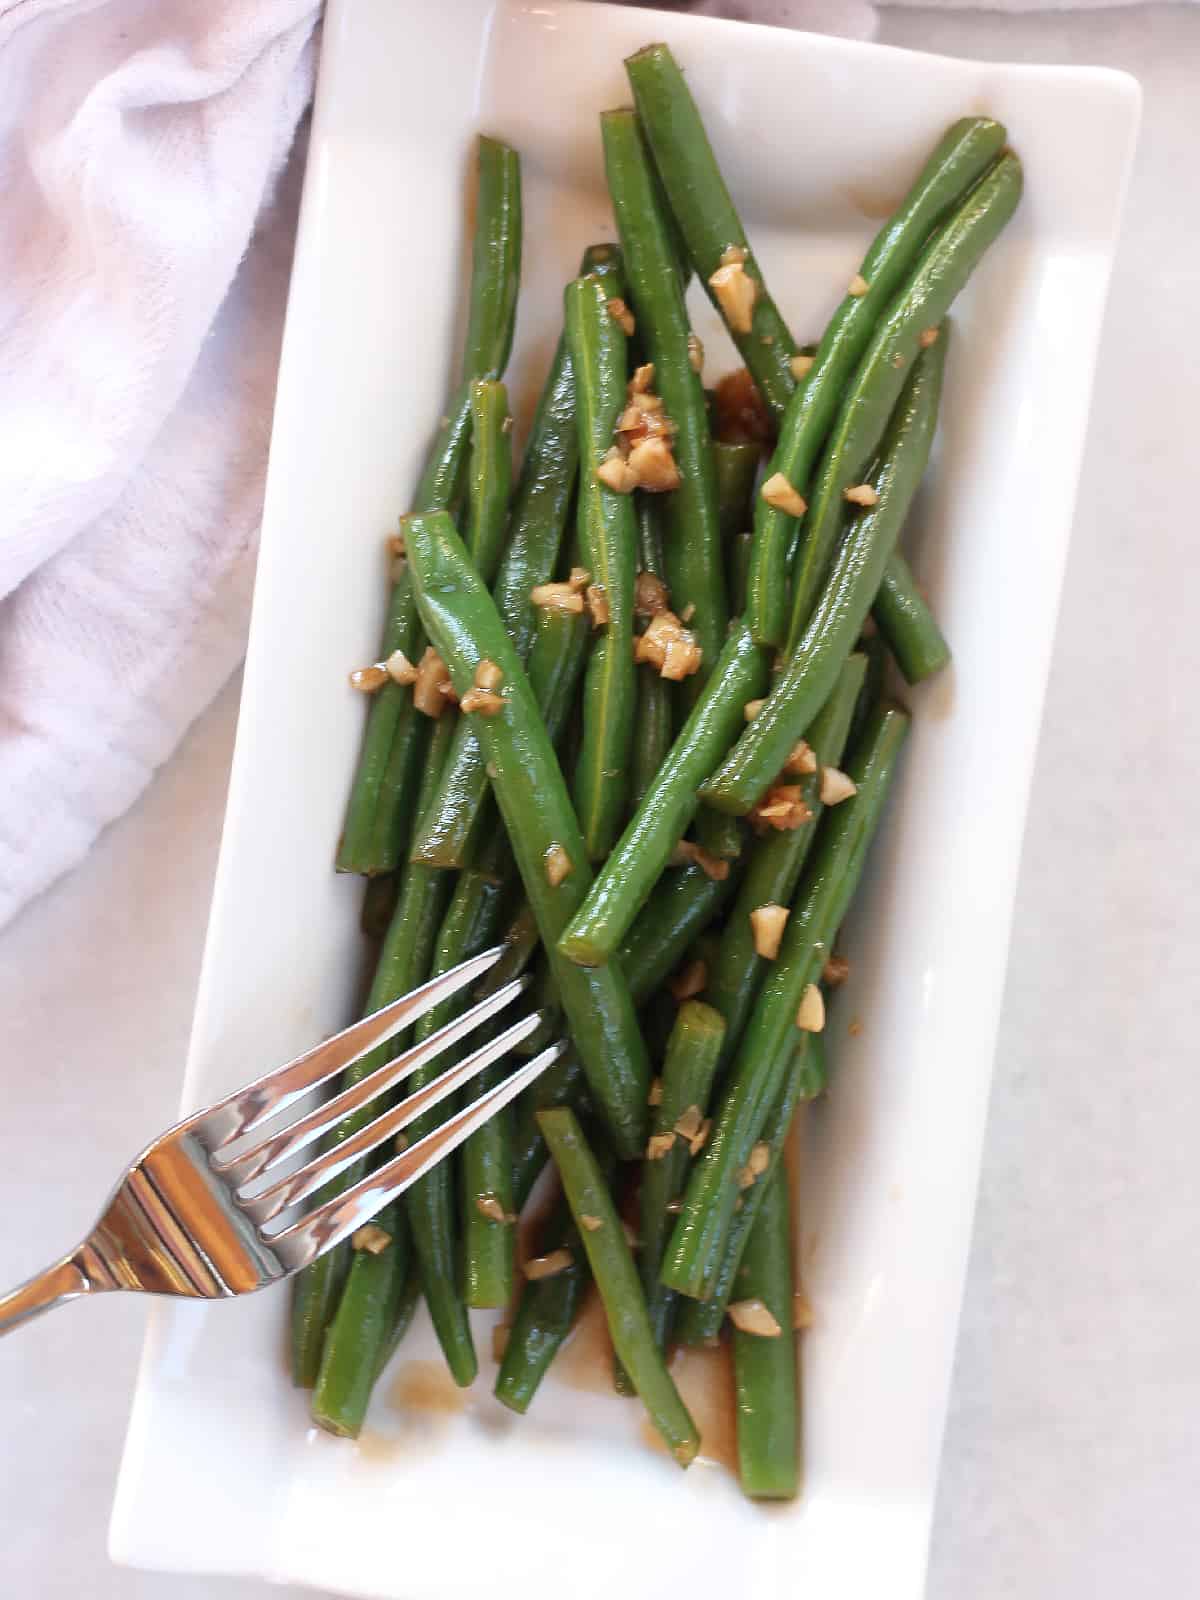 Balsamic green beans served on a white oblong plate with a fork.